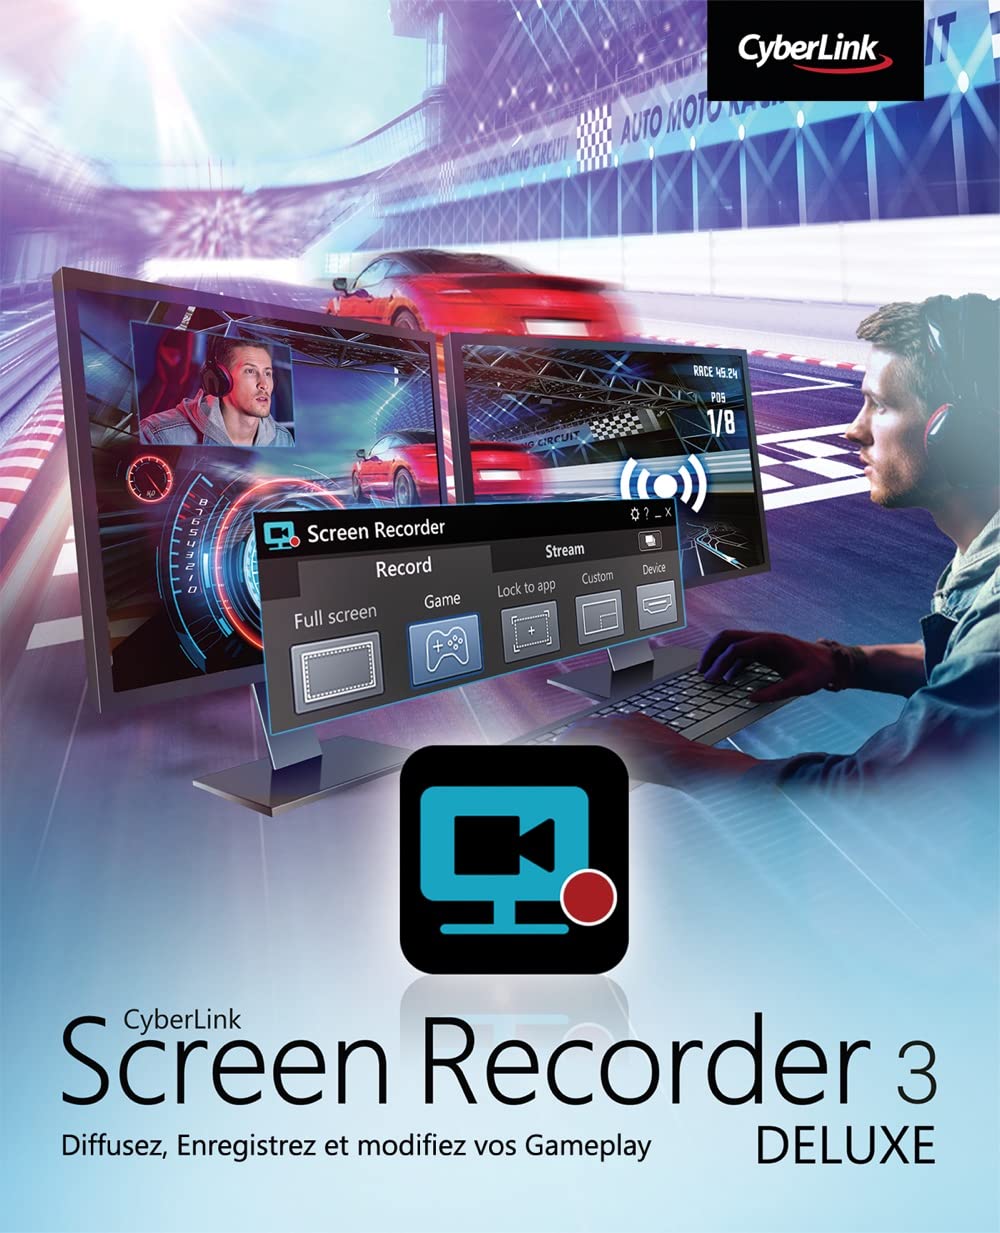 CyberLink Screen Recorder Deluxe 4.3.1.27955 for ios instal free